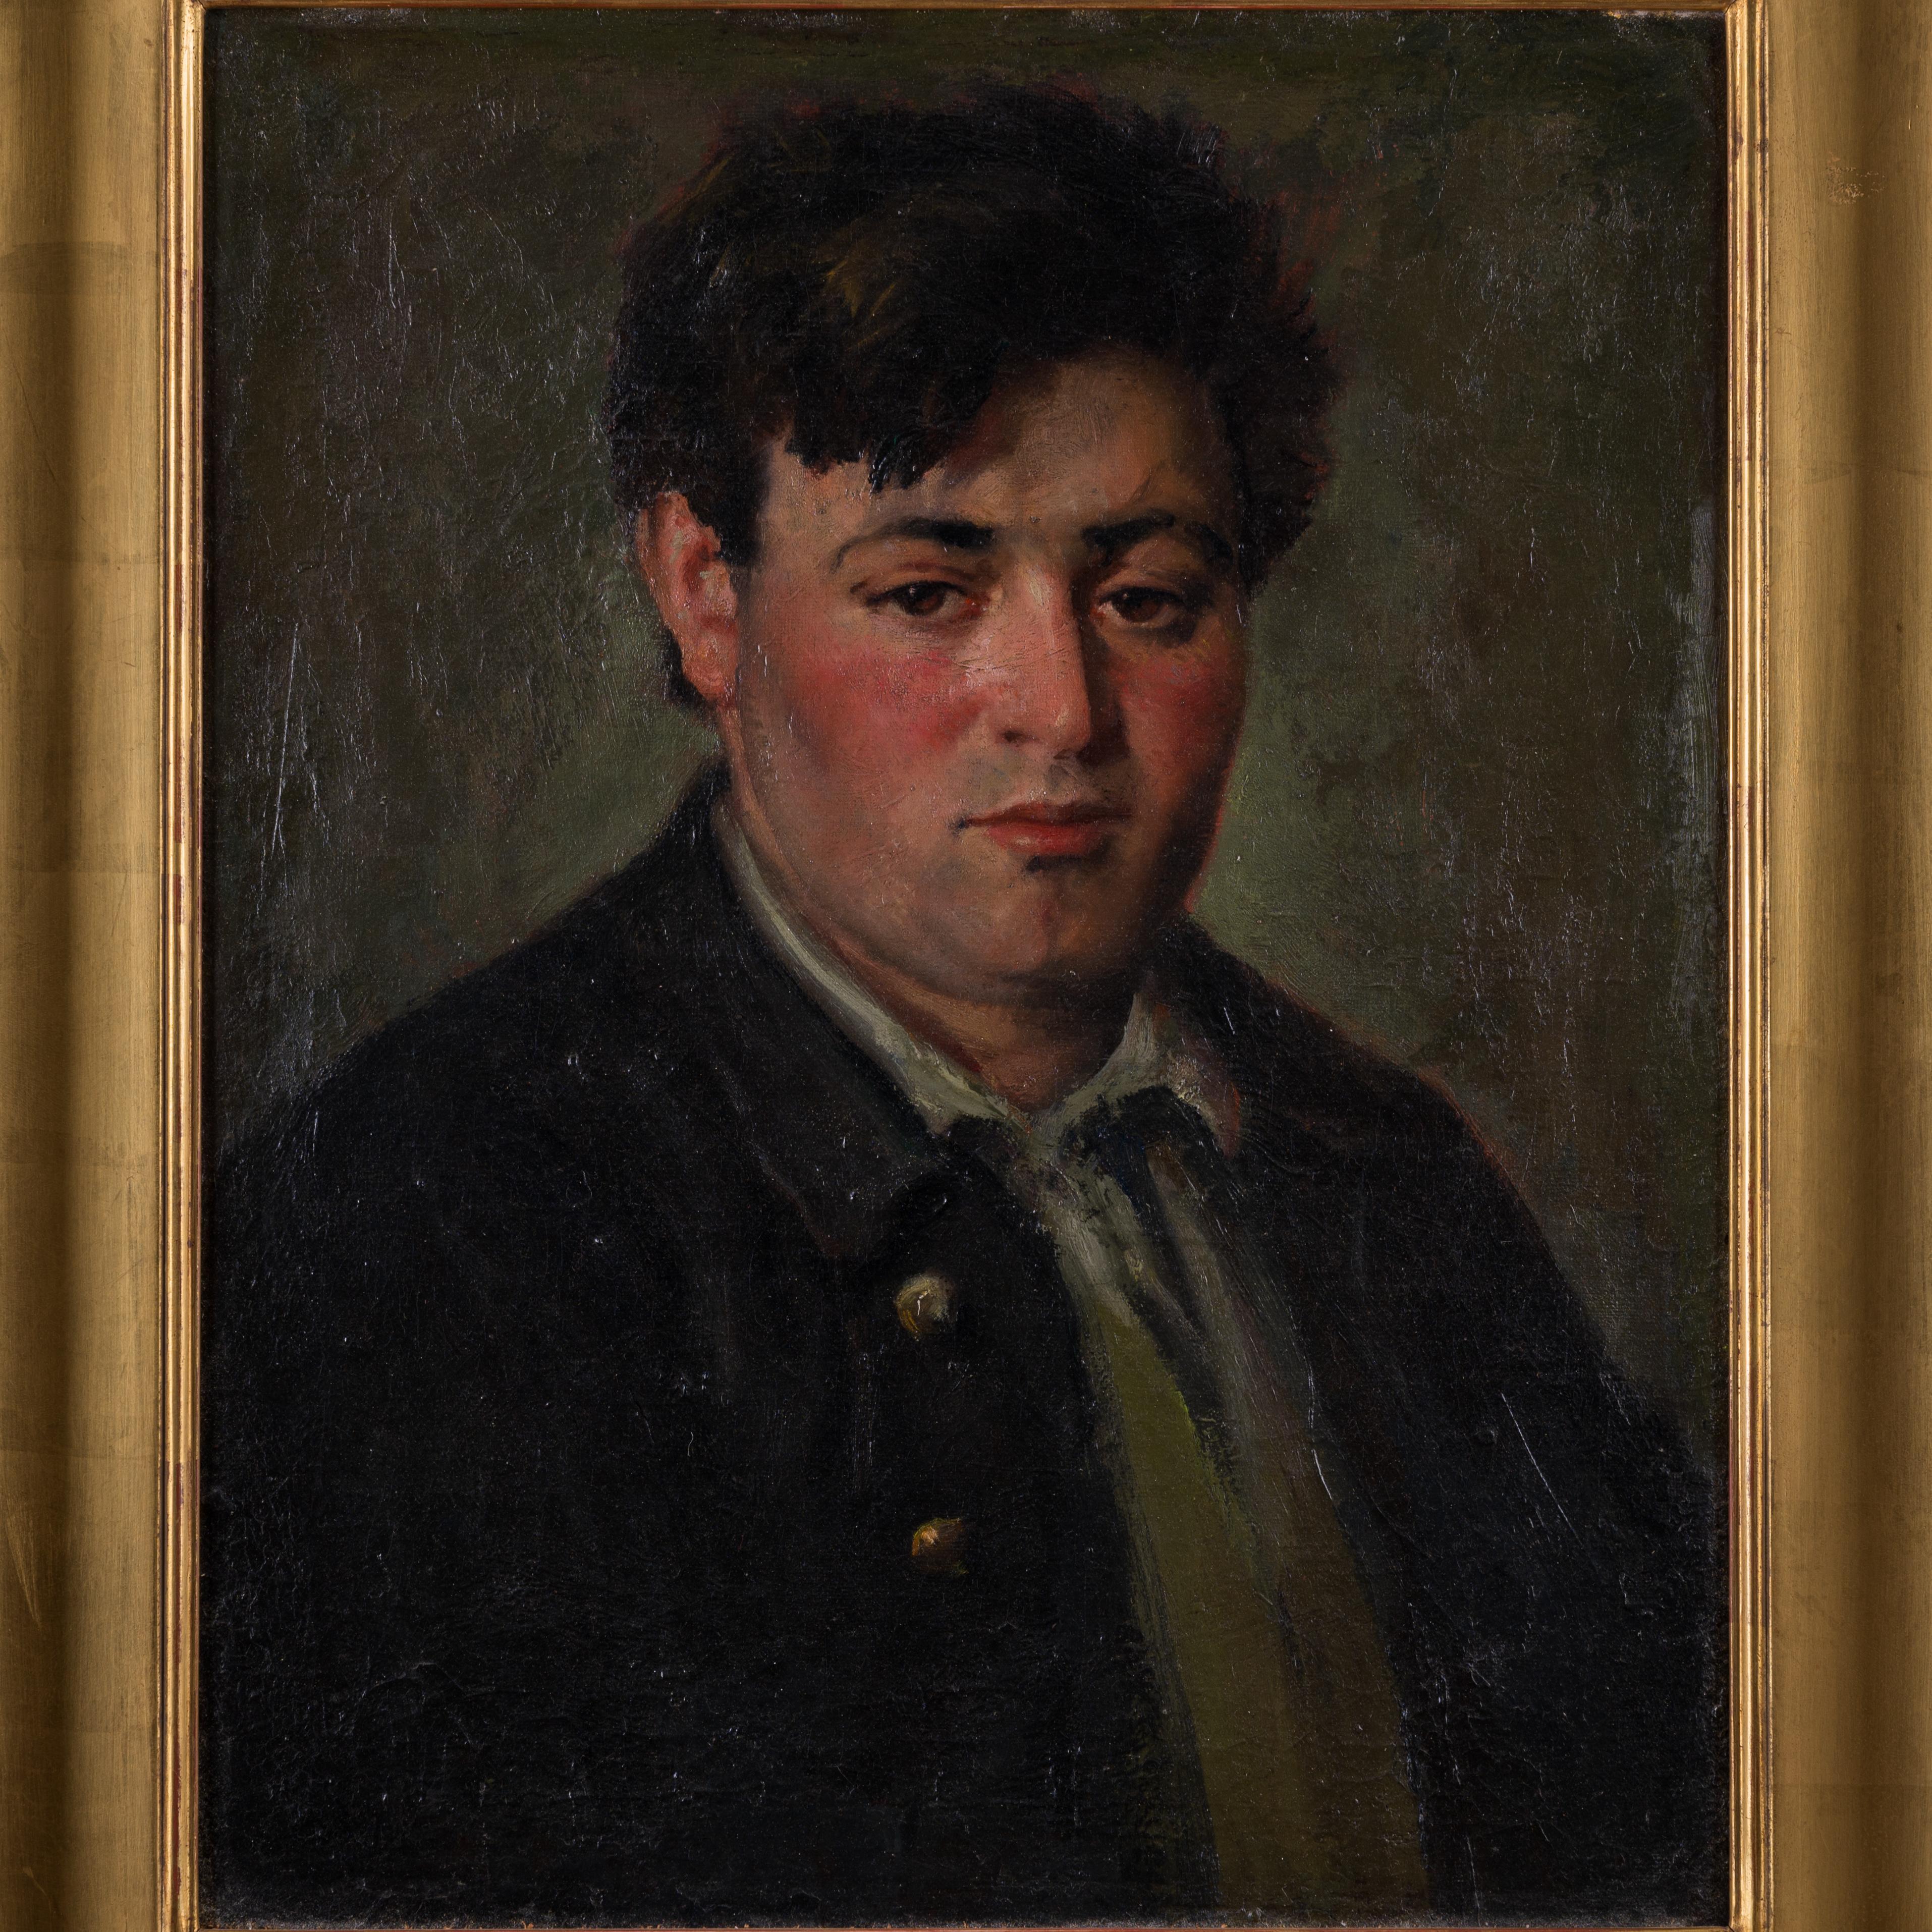 Antonio Barone
(New York/California, 1889-1971)

“Joe”, circa 1917
oil on canvas

sight: 16 by 20 inches
frame: 22 by 26 inches

Antonio Barone was born in Sicily and arrived at Ellis Island at age 11. He studied painting under William Merritt Chase